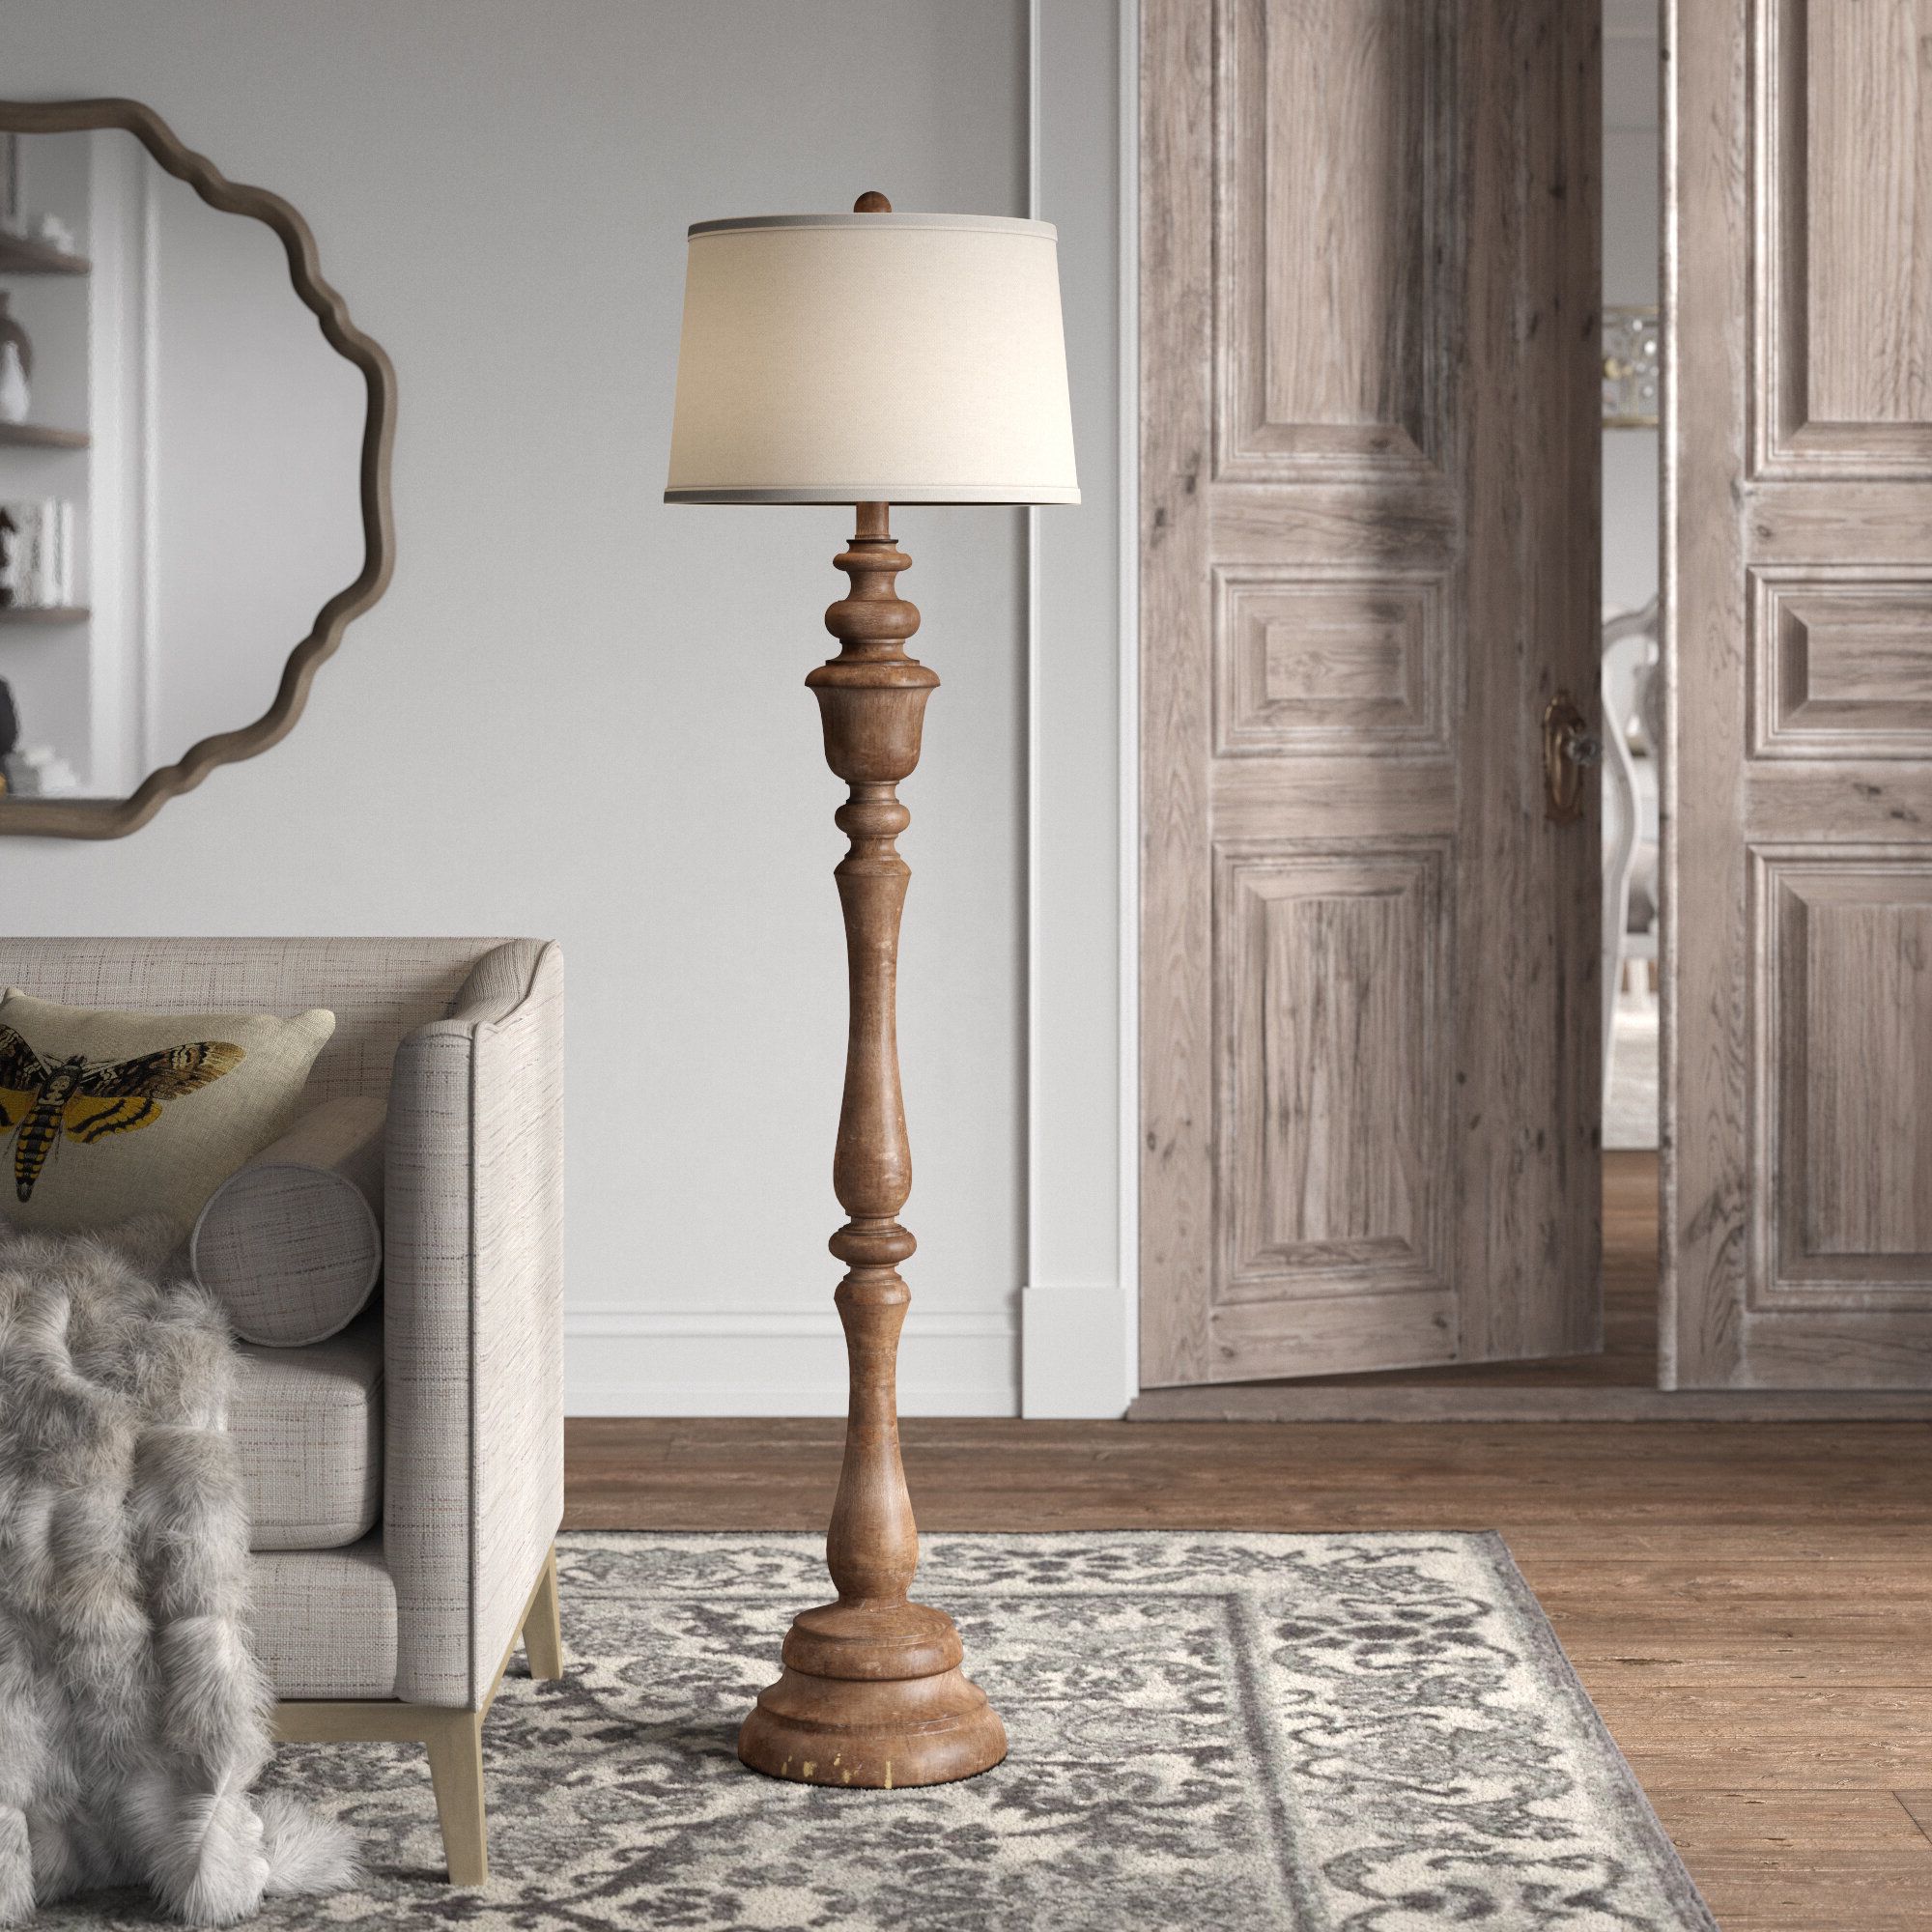 Kelly Clarkson Home Pitch 60" H Traditional Floor Lamp & Reviews | Wayfair Pertaining To Brown Floor Lamps (View 7 of 20)